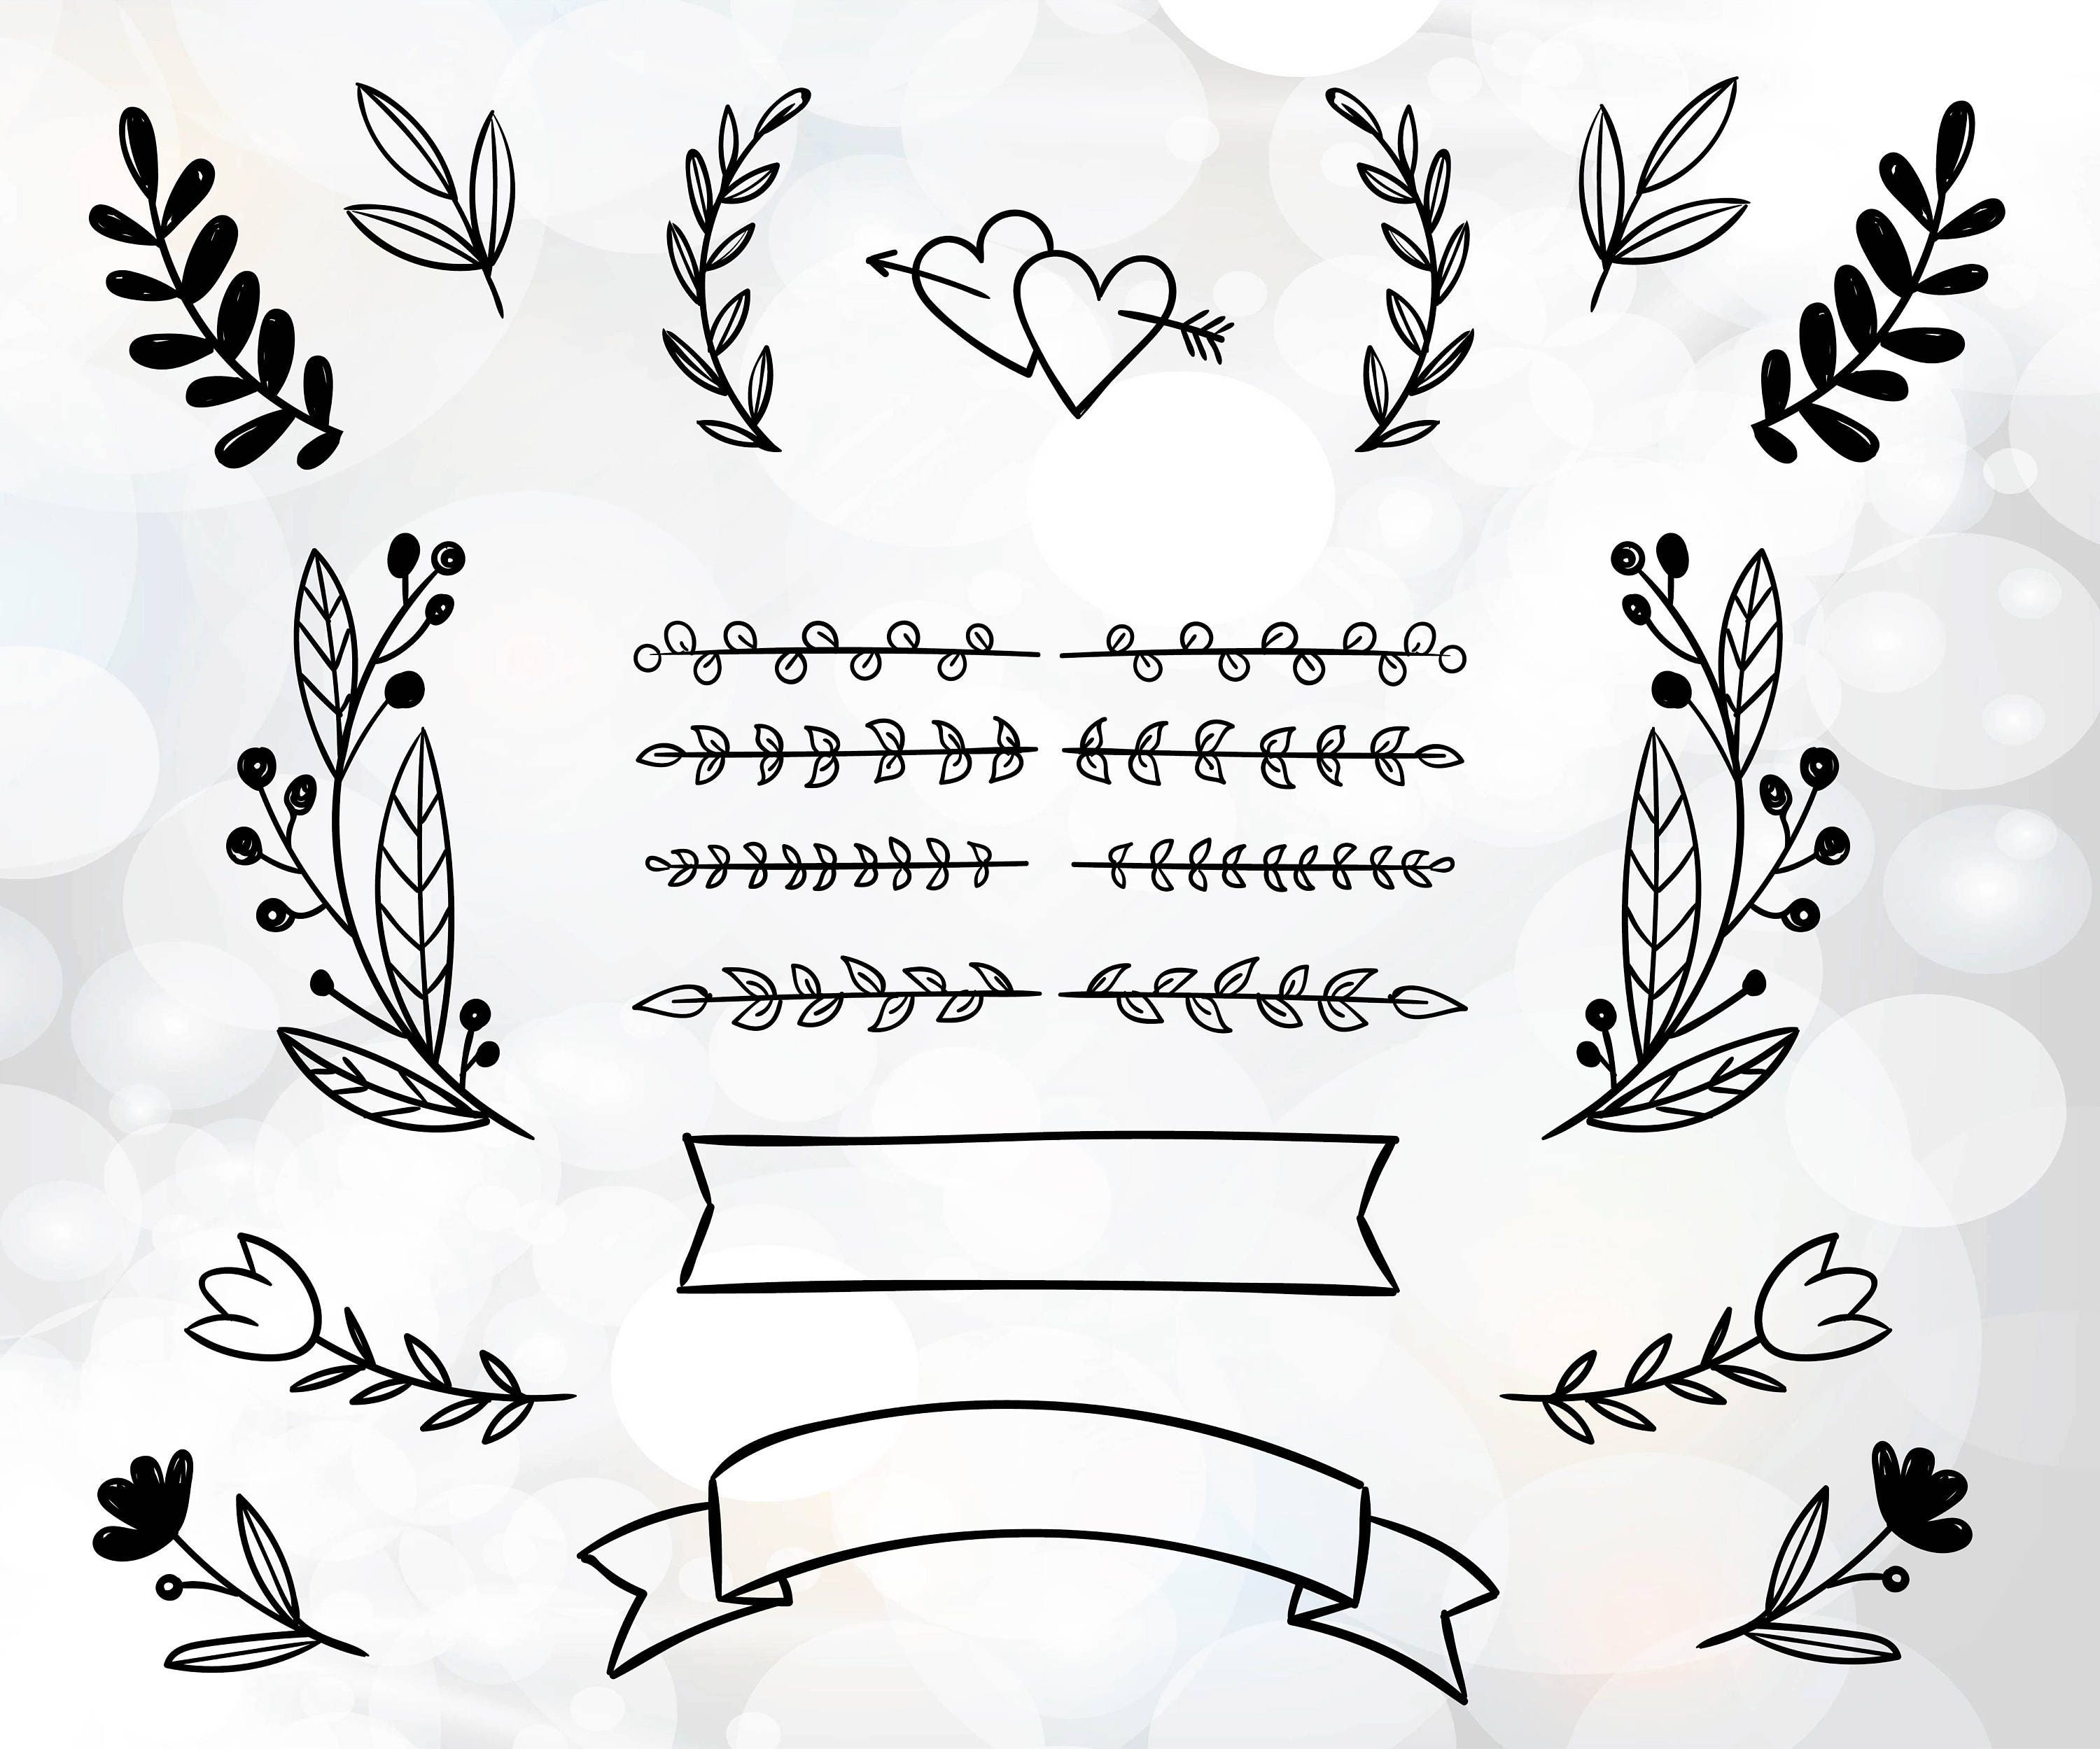 Download Free Svg Wedding "Wedding" With Flower File For Cricut - King SVG 500.000+ Free vector icons in ...